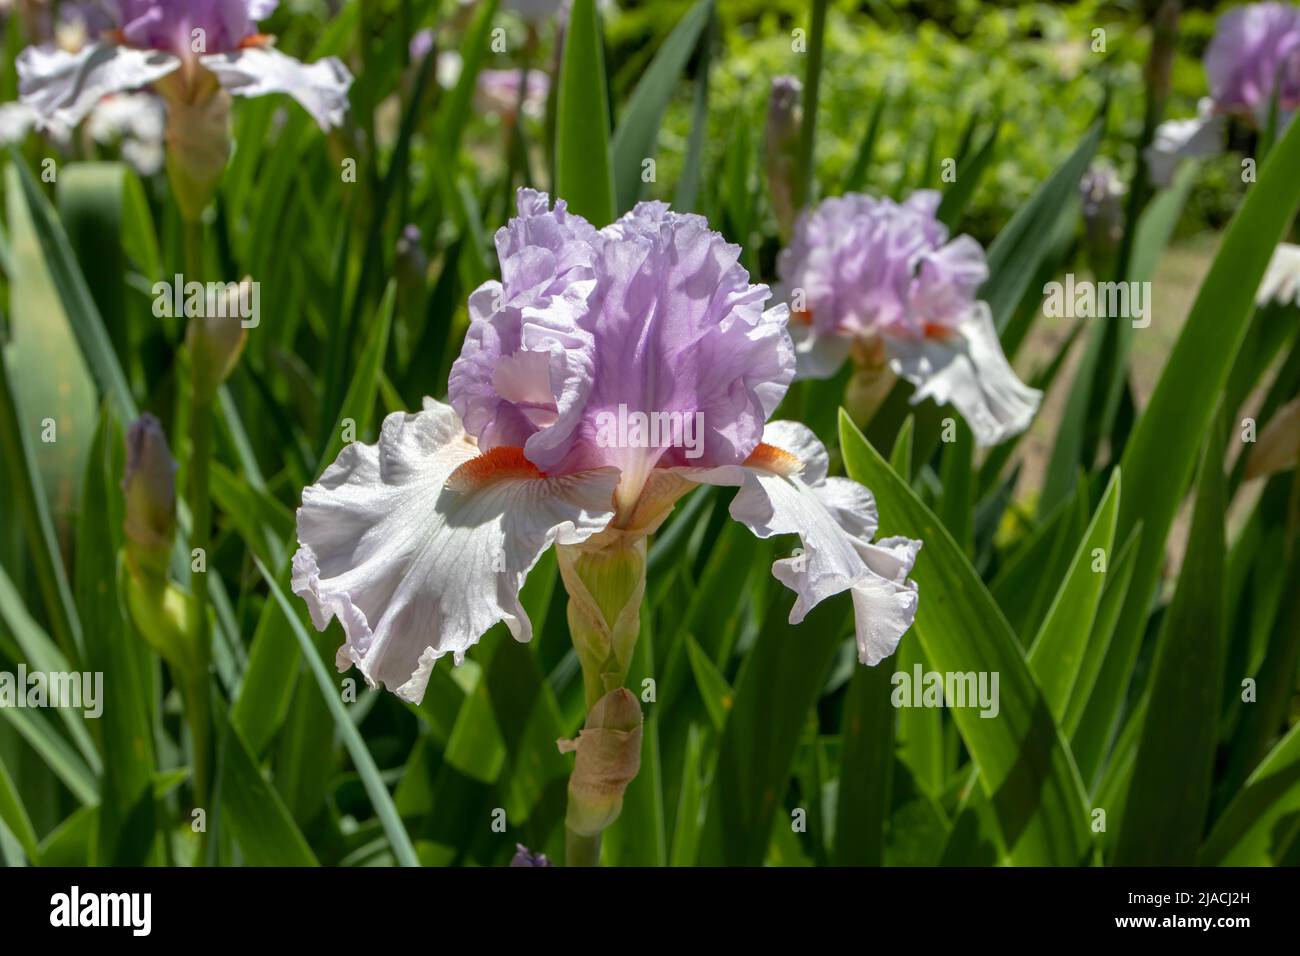 Bearded iris cultivar flowers with lilac standards, light lilac falls and coral beard. Stock Photo